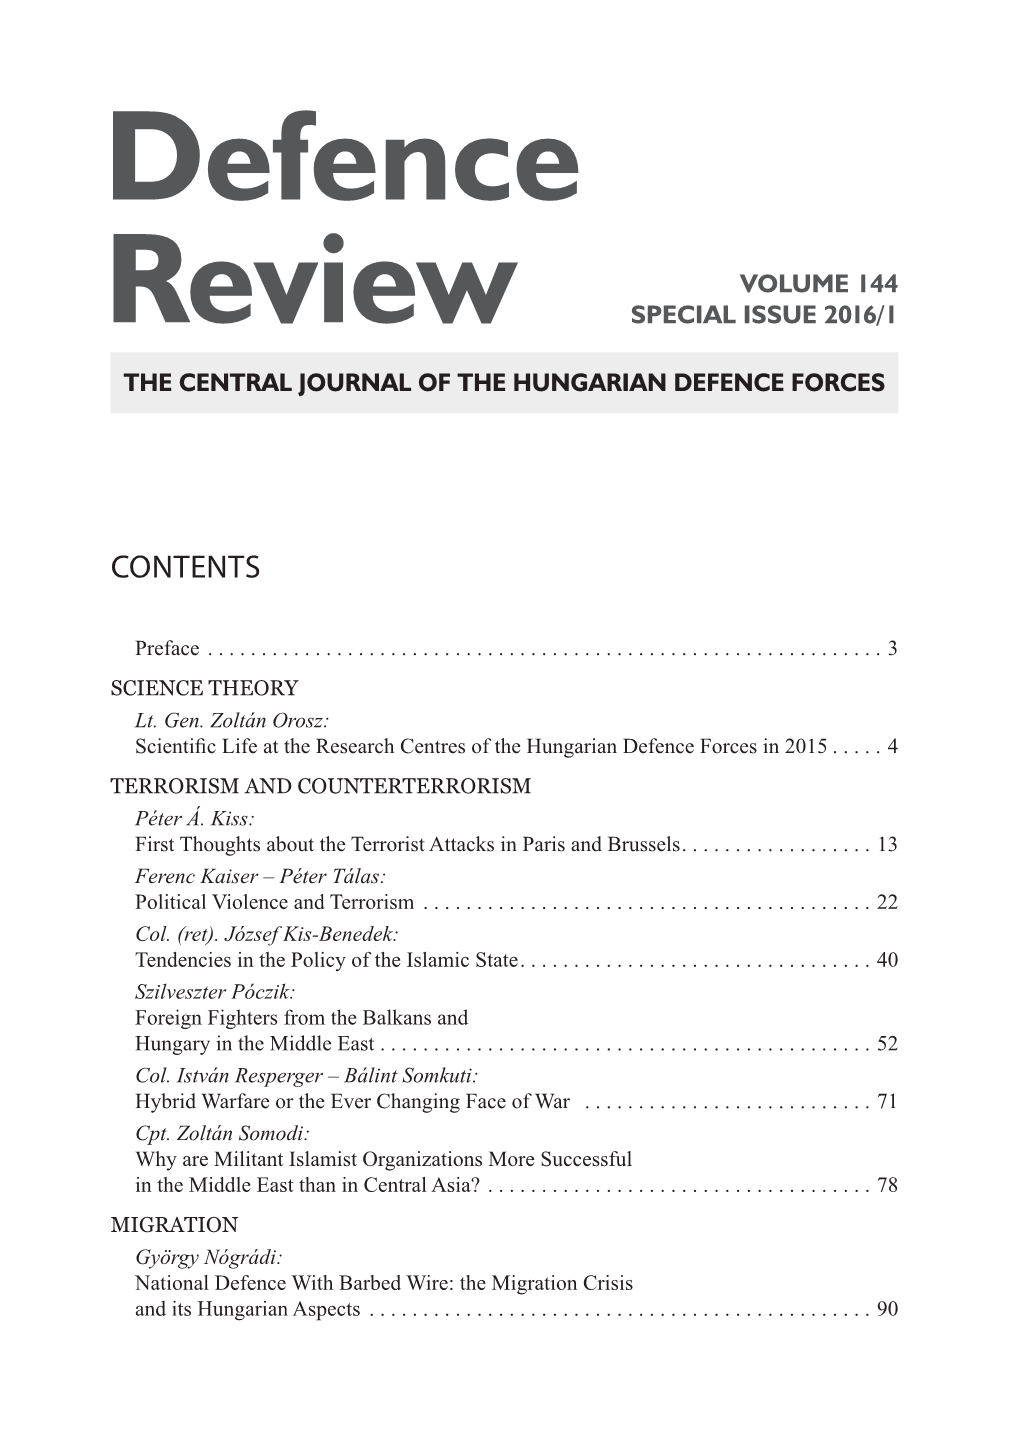 Defence Review Is Continuing a Recently Established Tradition Among Hungarian Military Science Journals